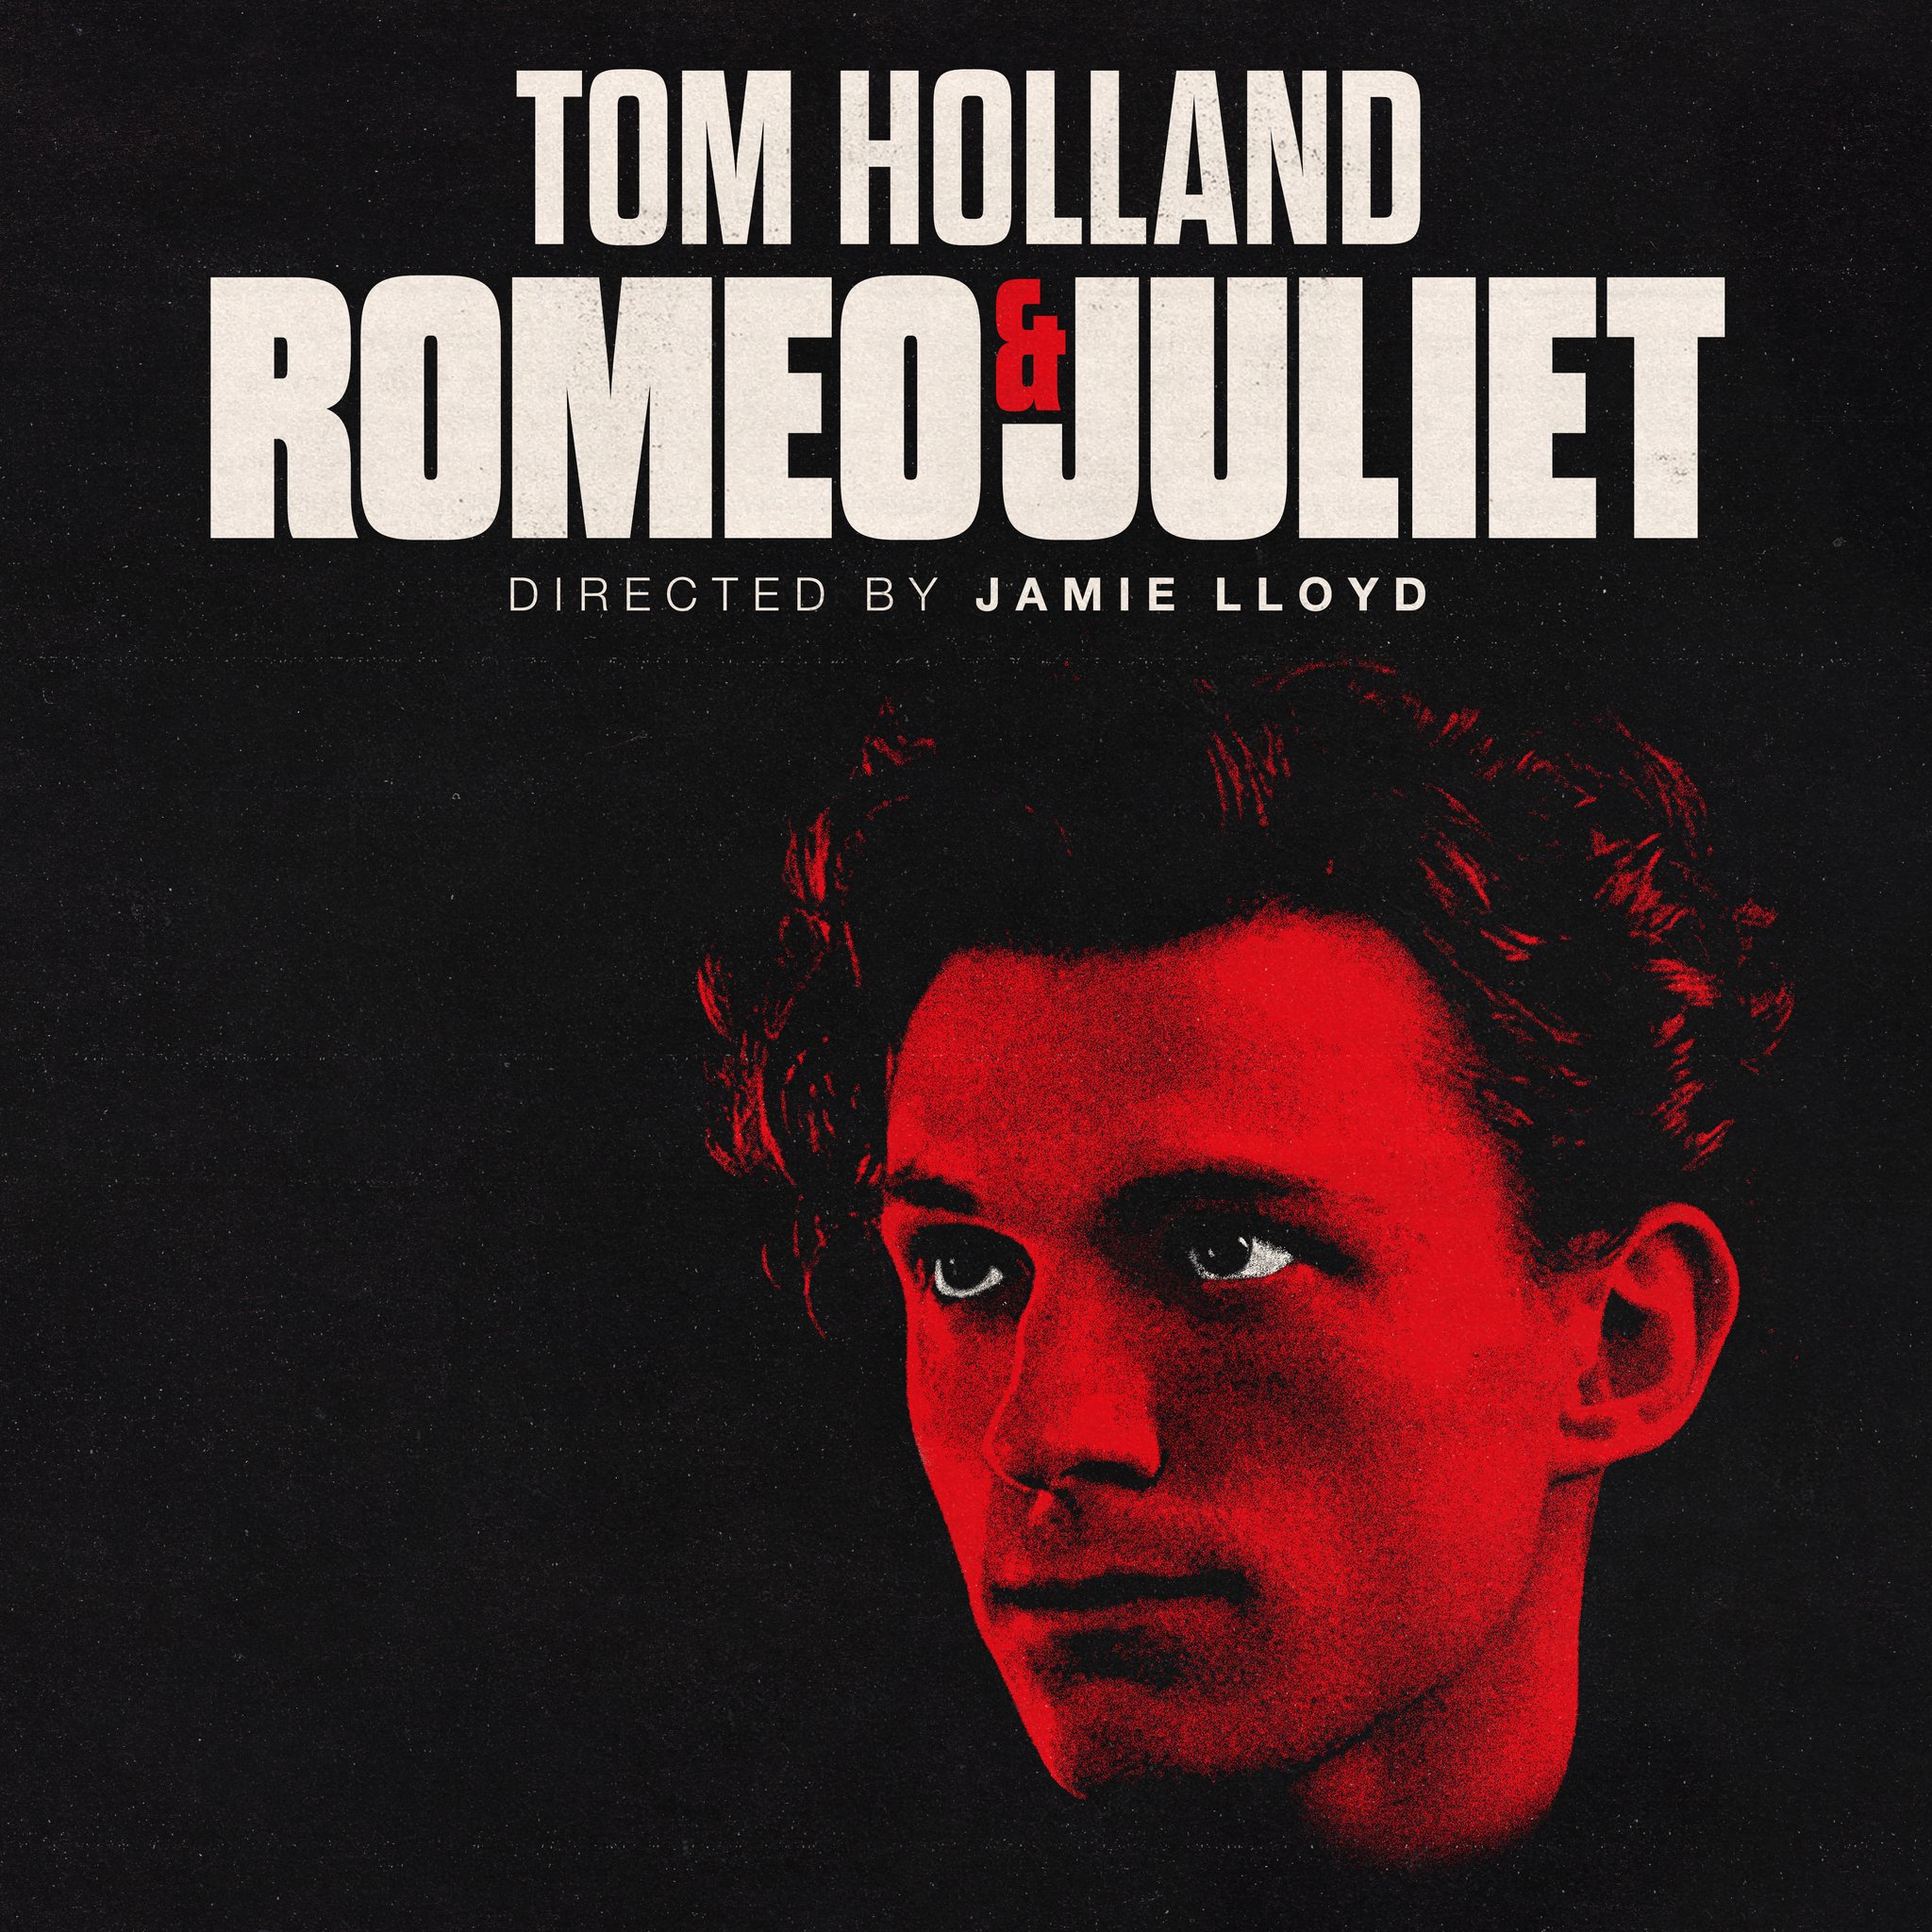 TOM HOLLAND TO STAR IN WEST END PRODUCTION OF ROMEO & JULIET DIRECTED